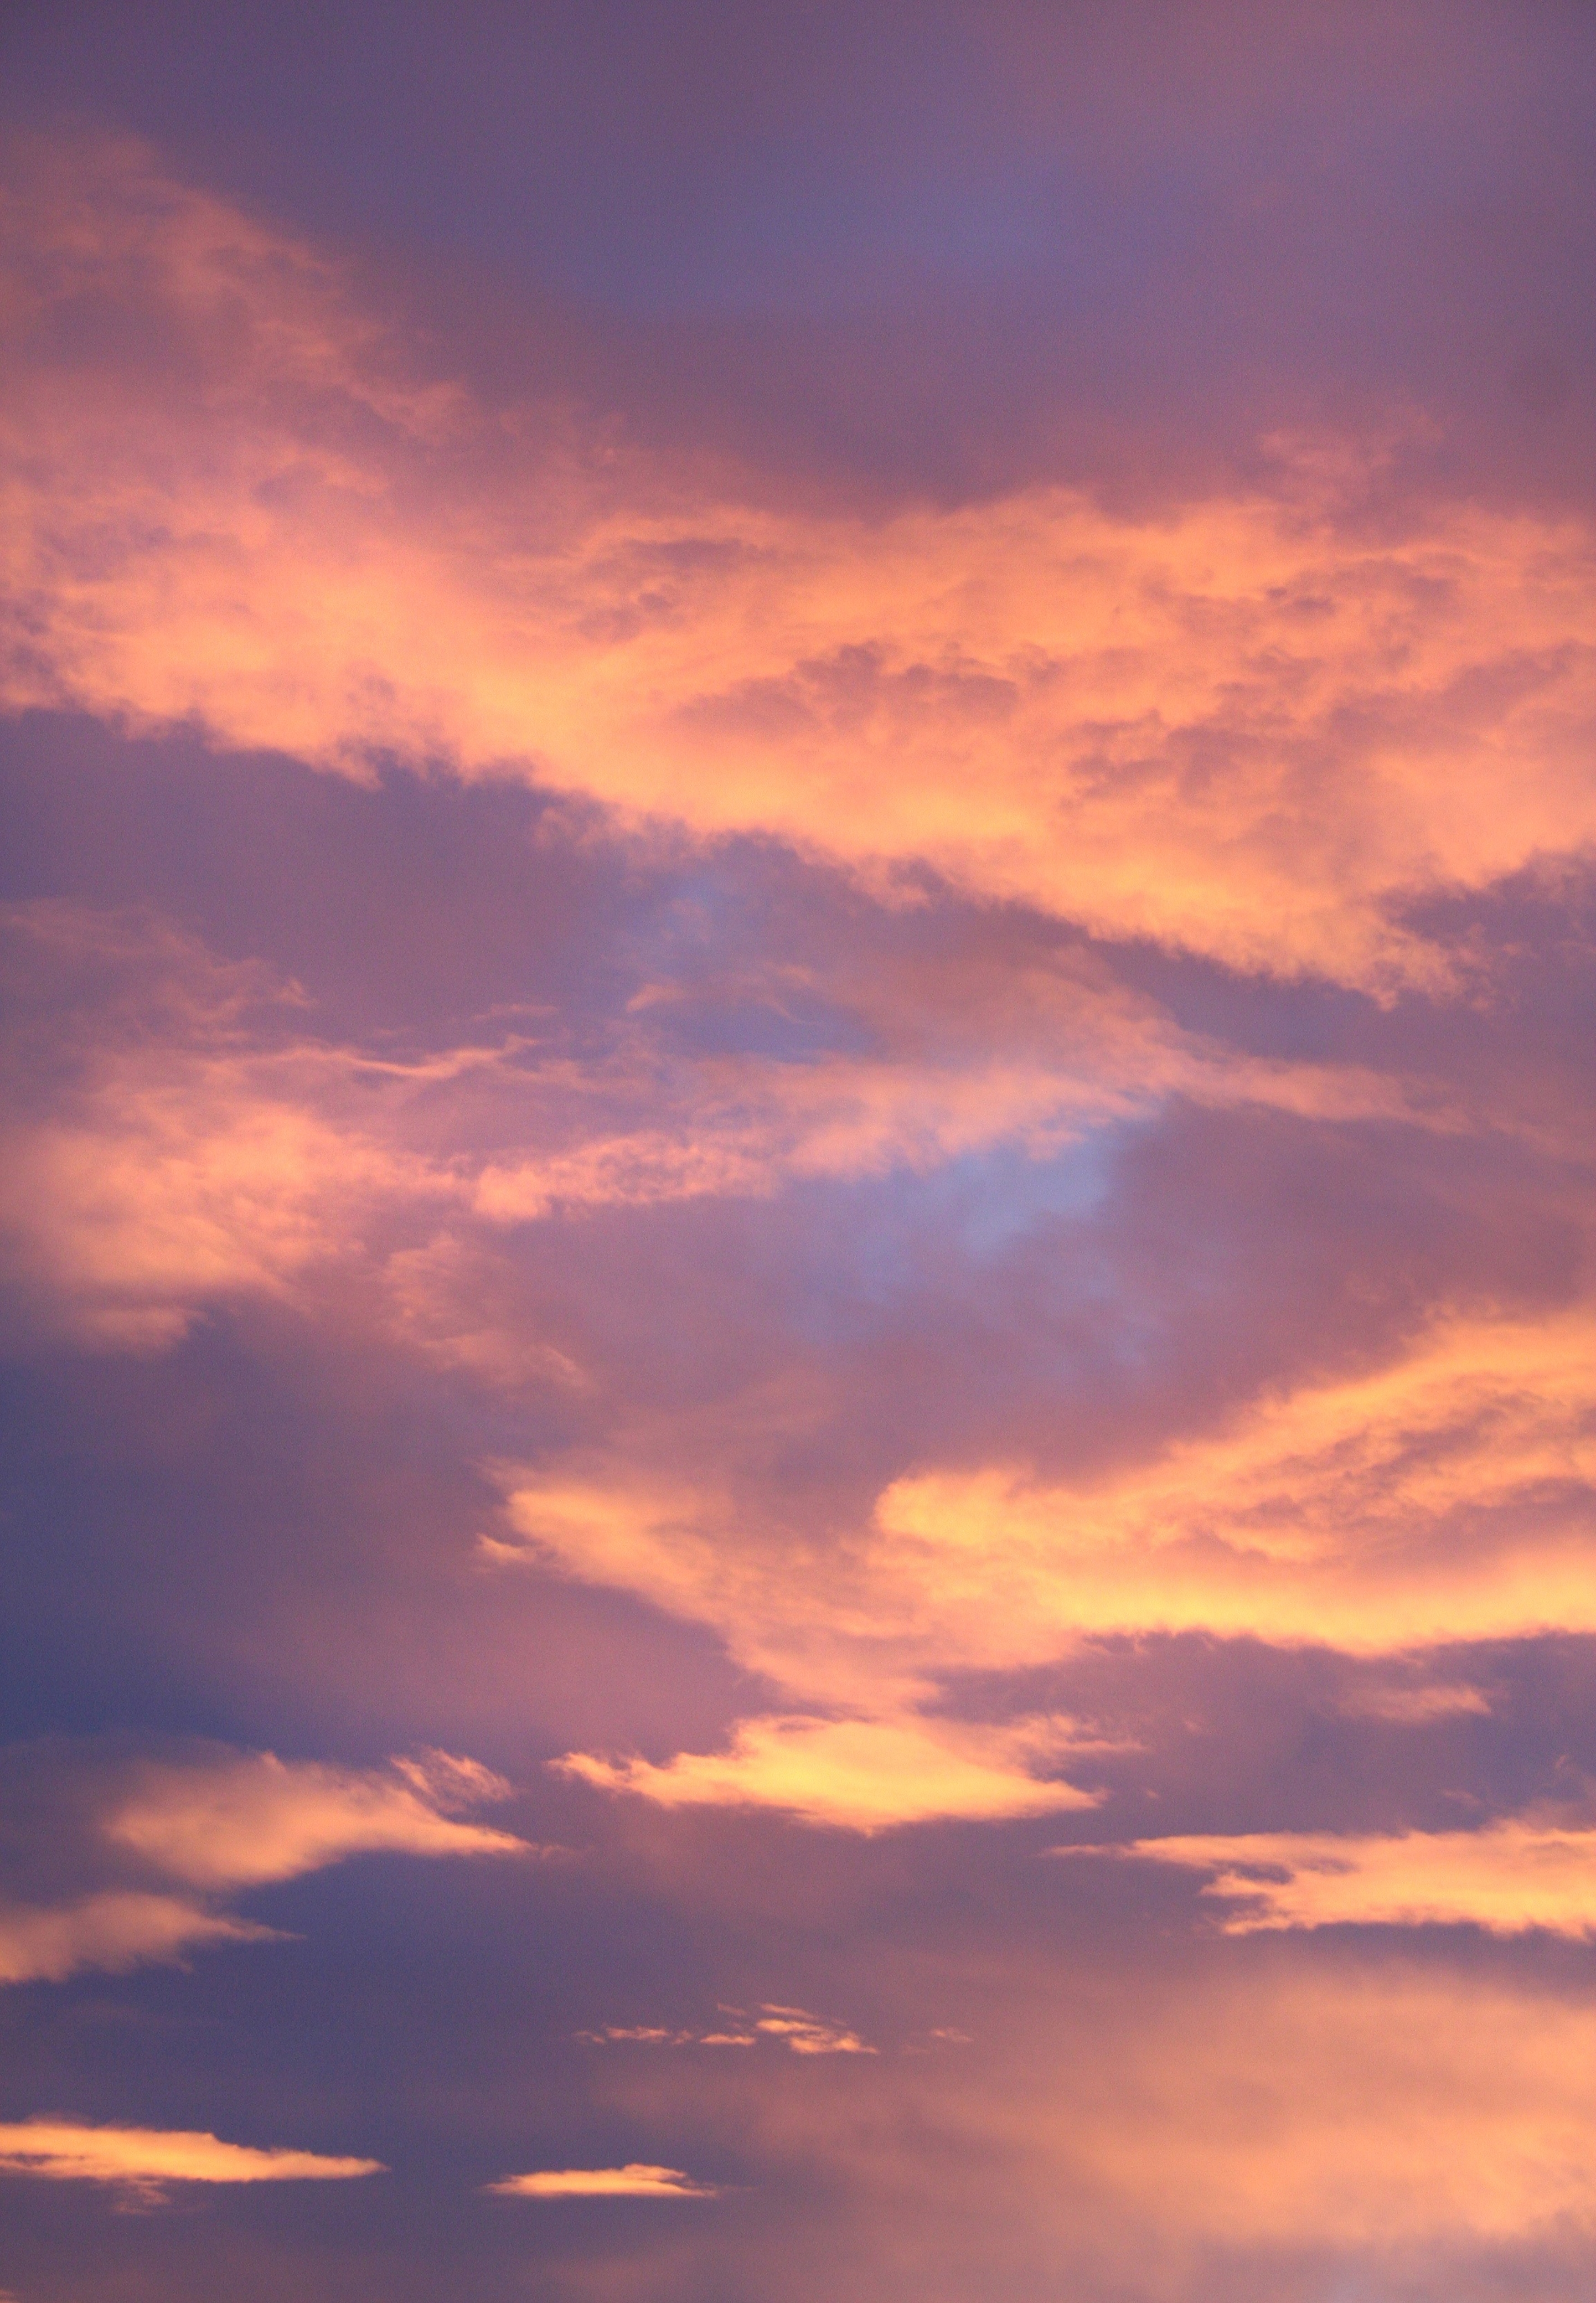 clouds, nature, sunset, sky, cloudy lock screen backgrounds